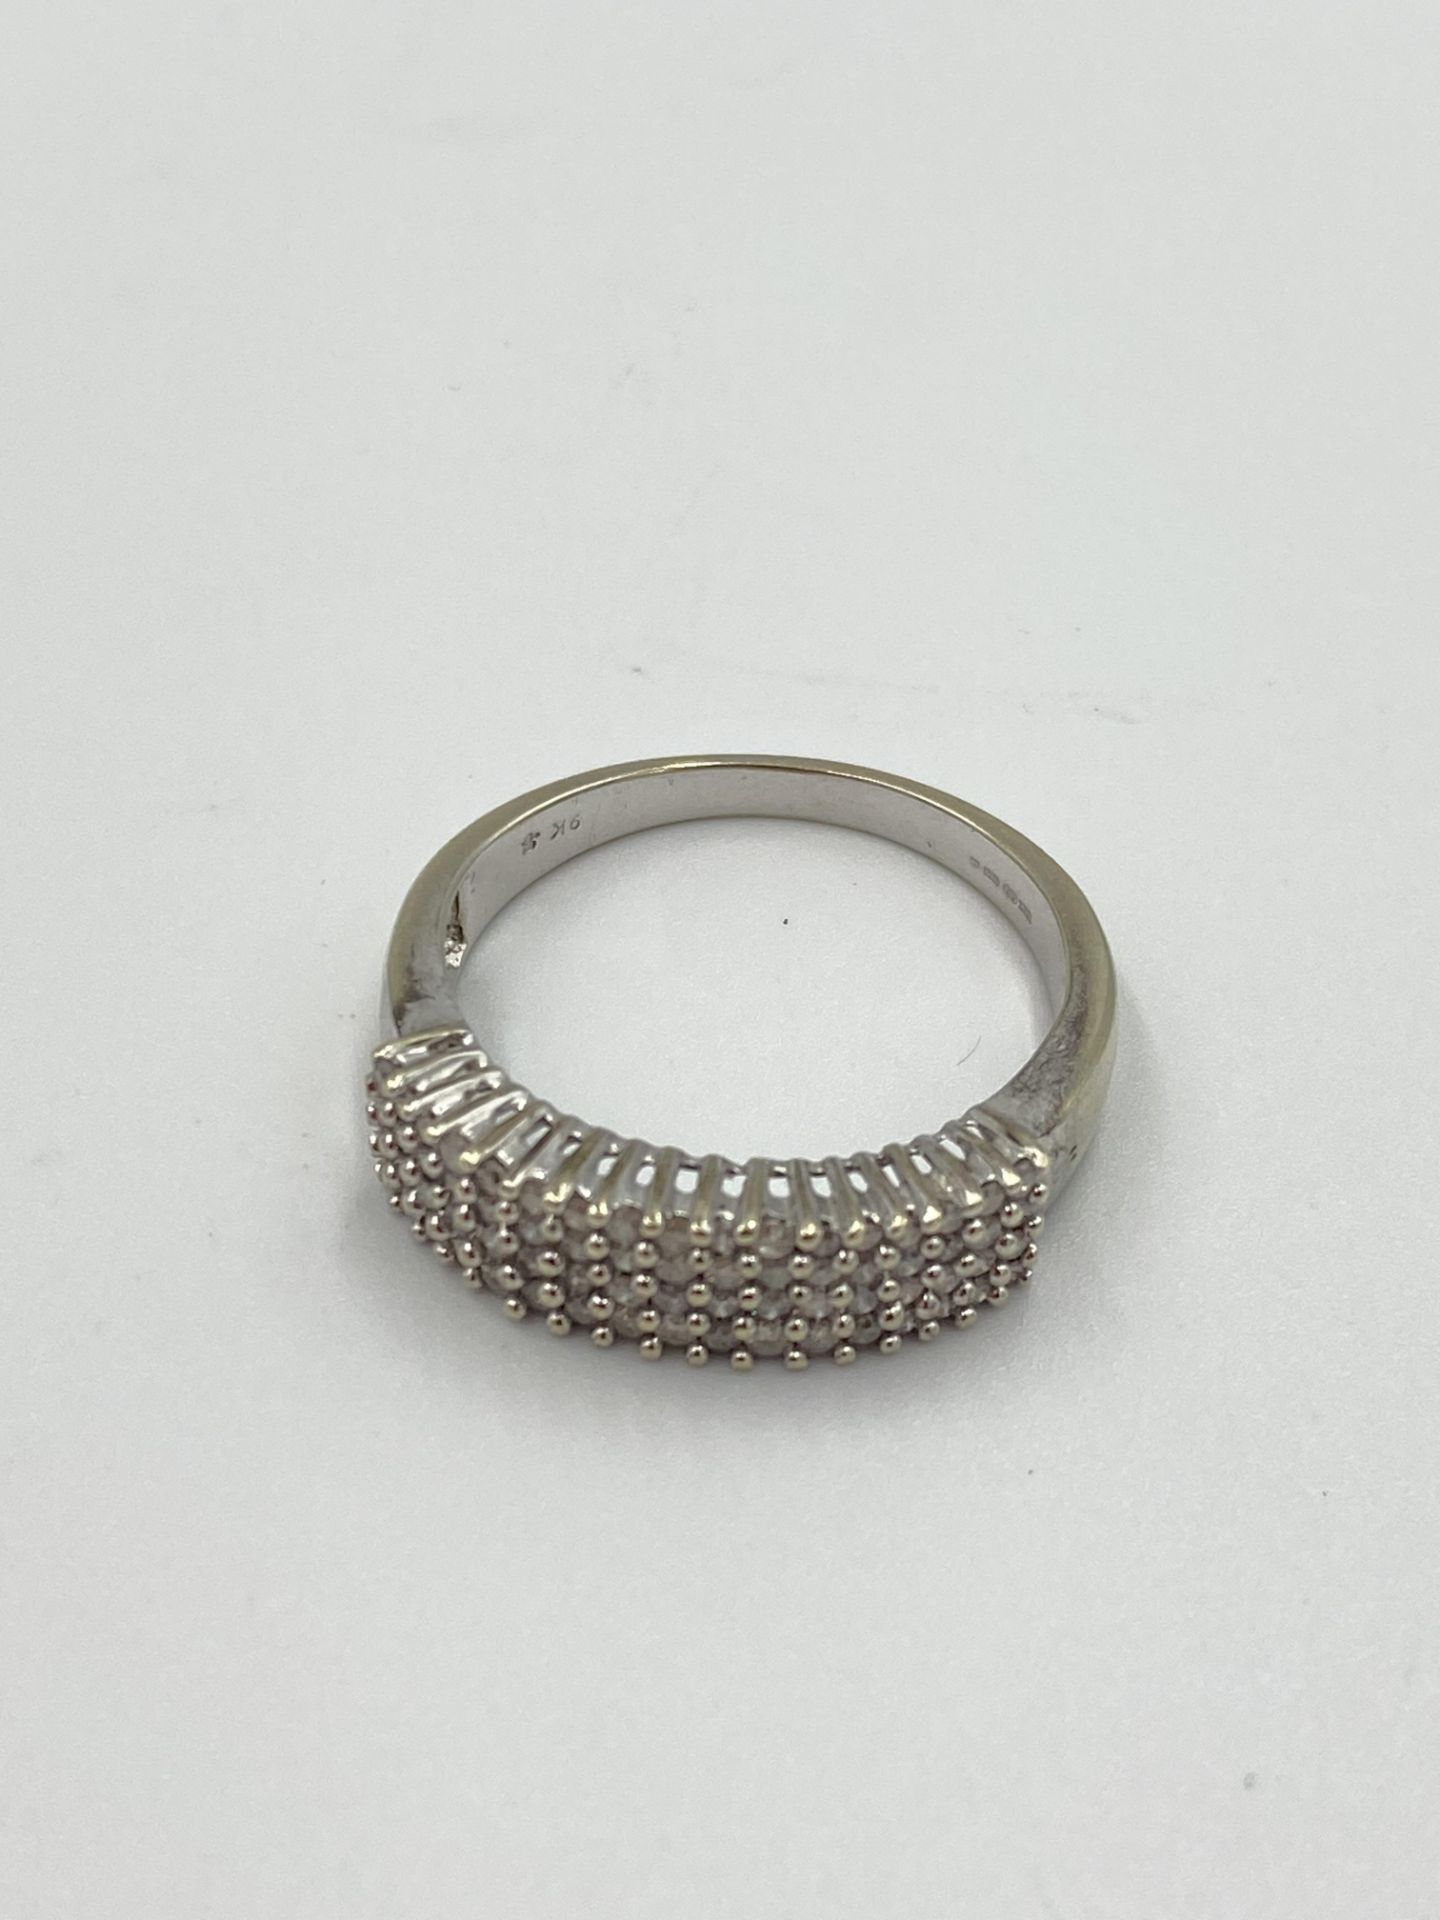 9ct white gold and diamond ring - Image 6 of 6